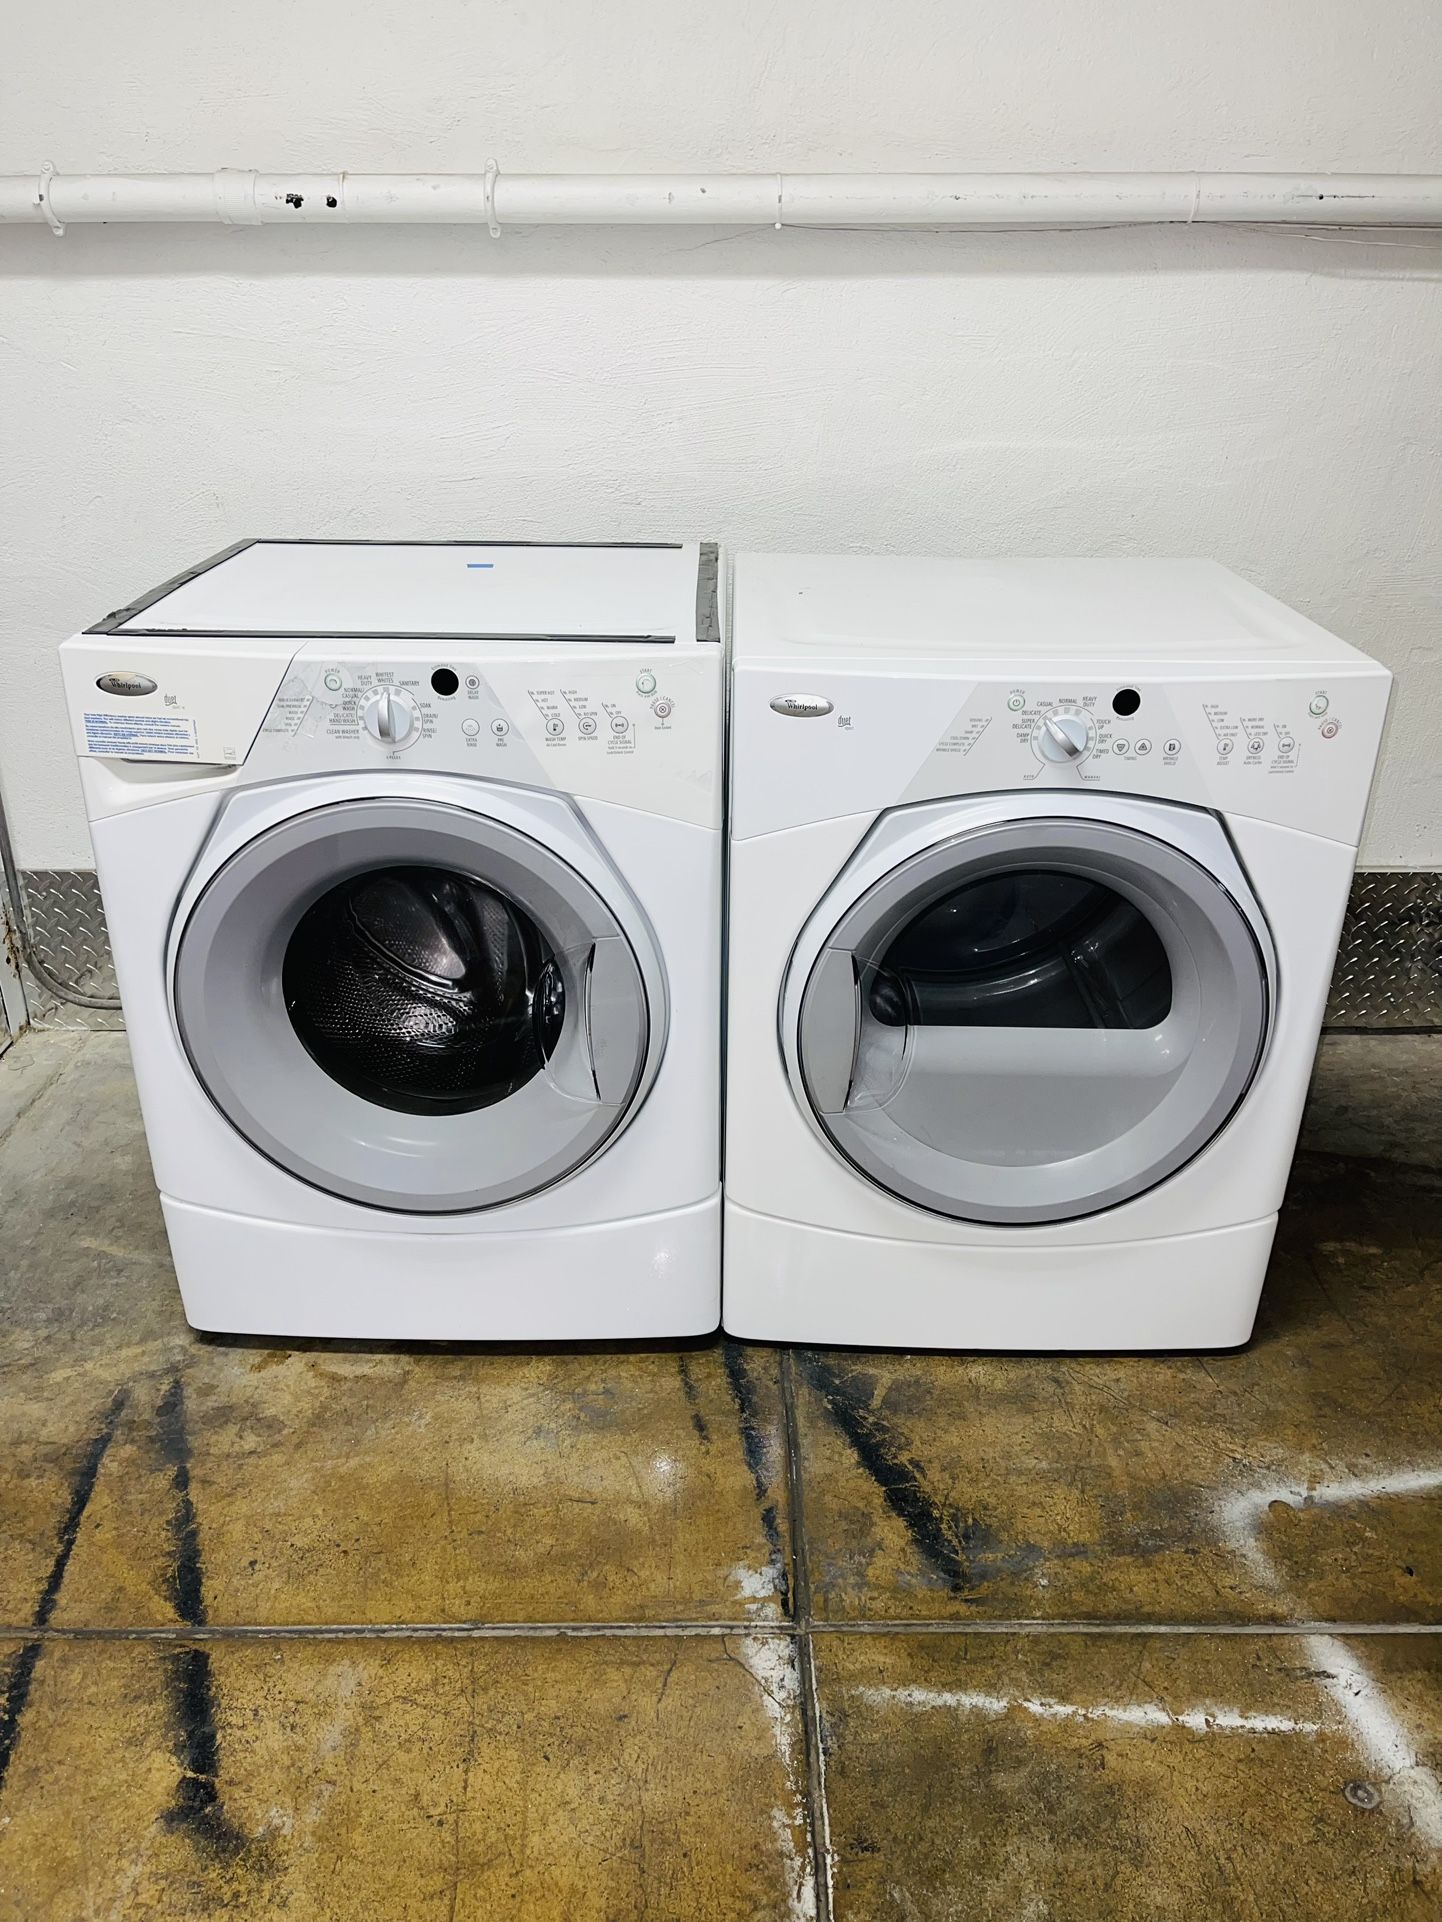 whirlpool washer and dryer in very good condition a receipt for 90 days warranty